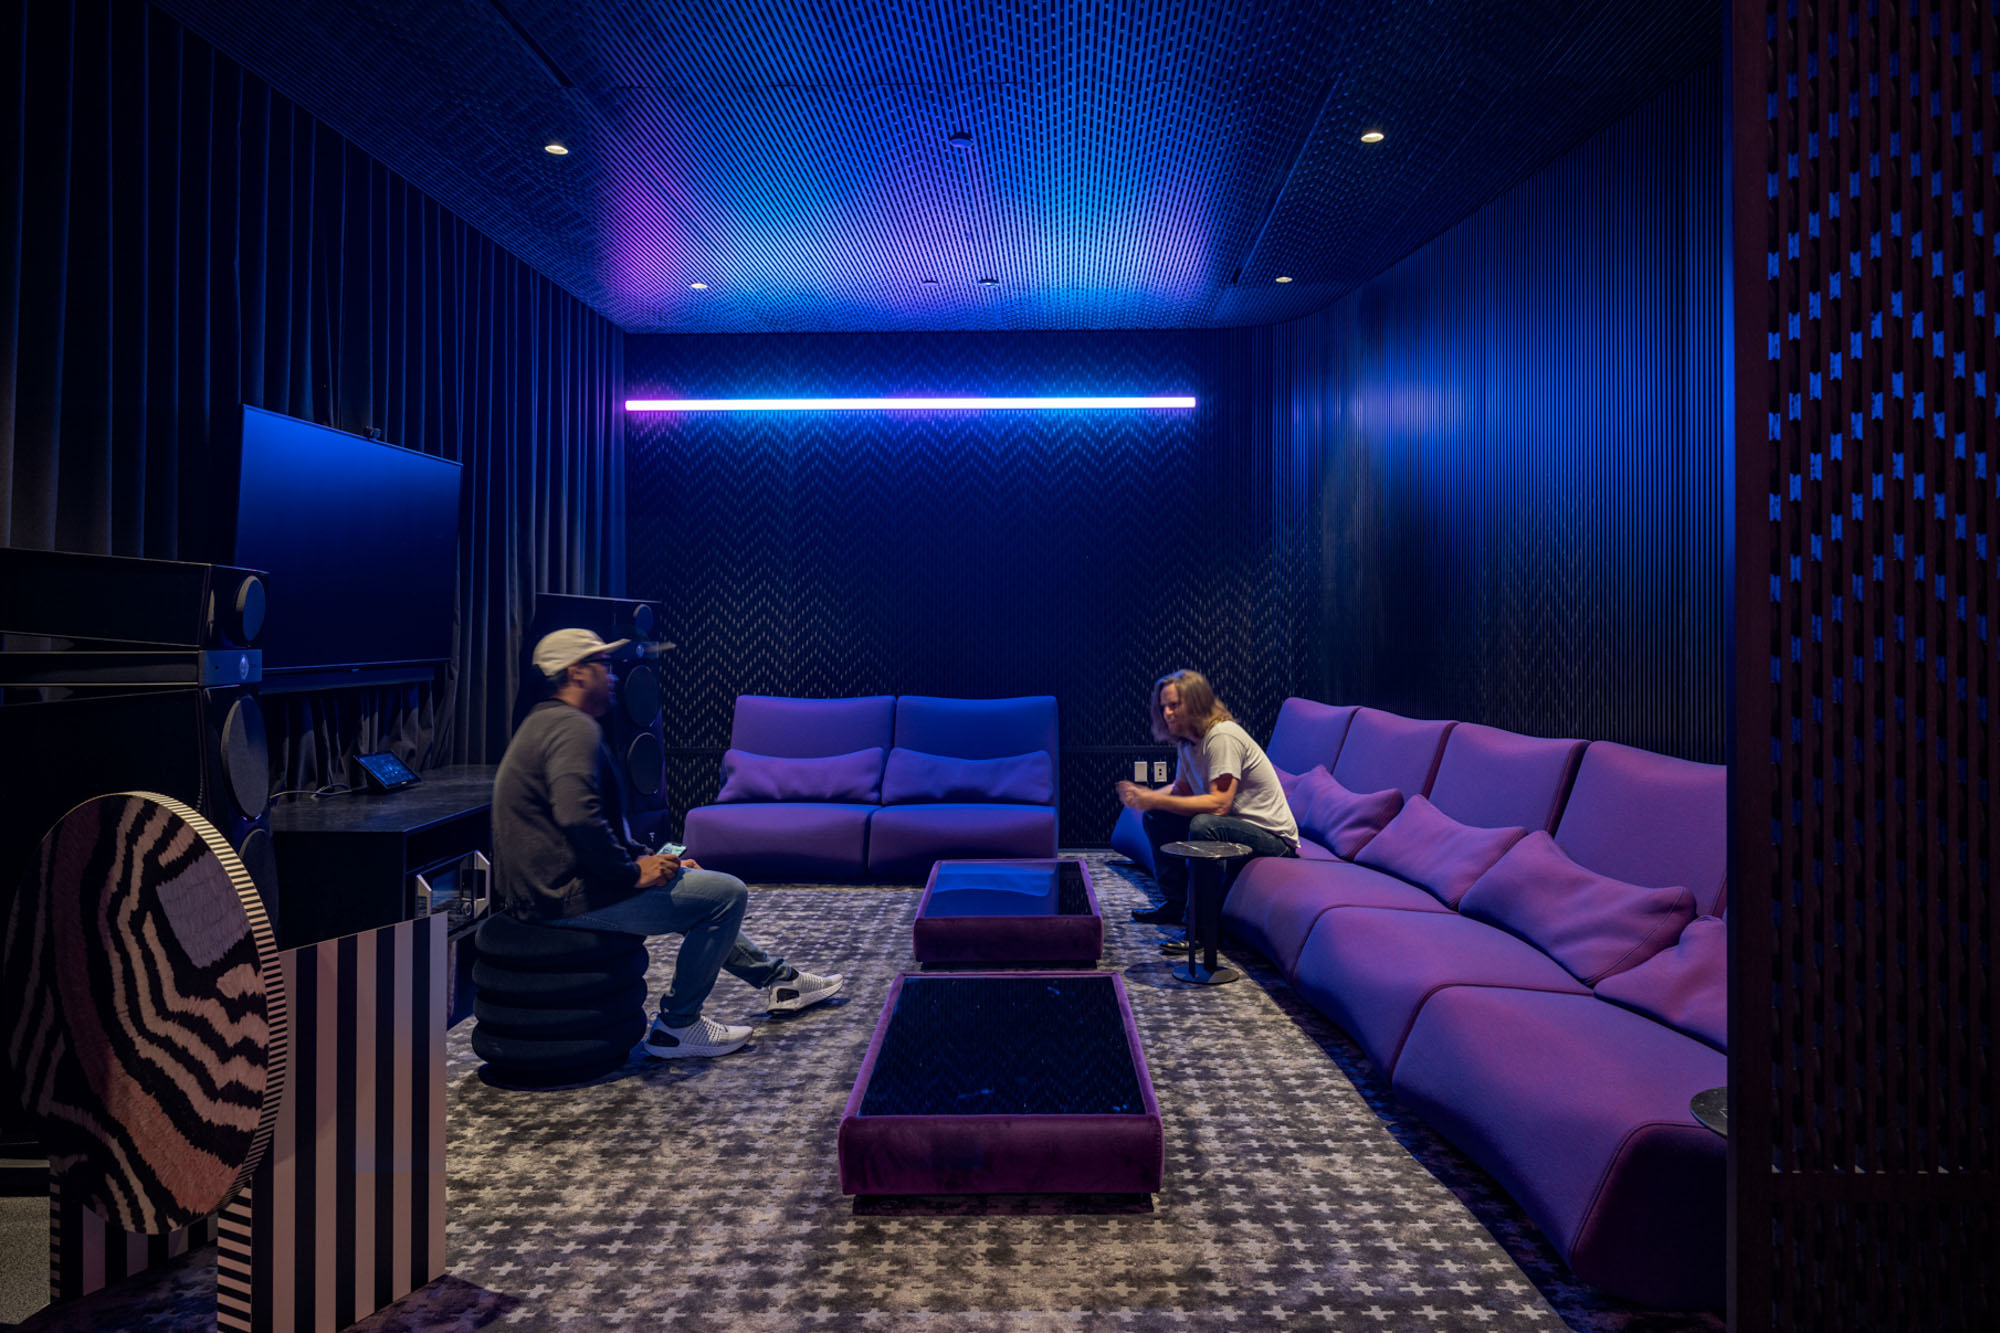 Looking into Spotify's listening lounge with purple couches and blue neon lights